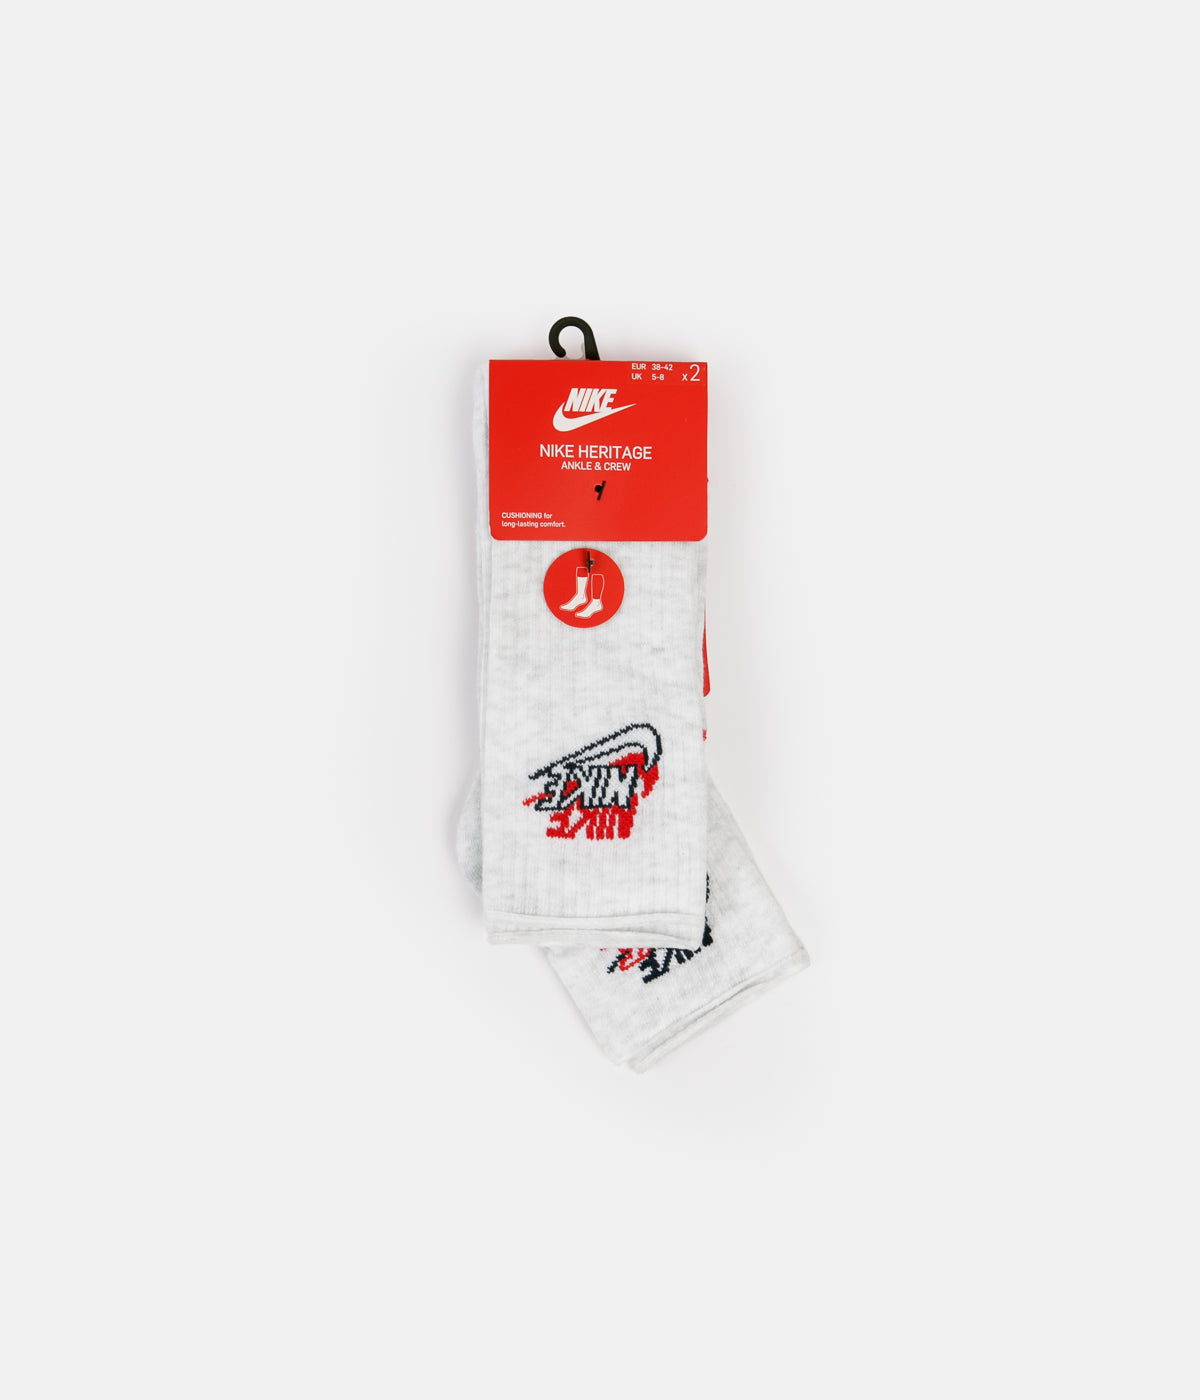 Nike Chaussettes Heritage New Vintage 2-Pack - Blanc/Rouge